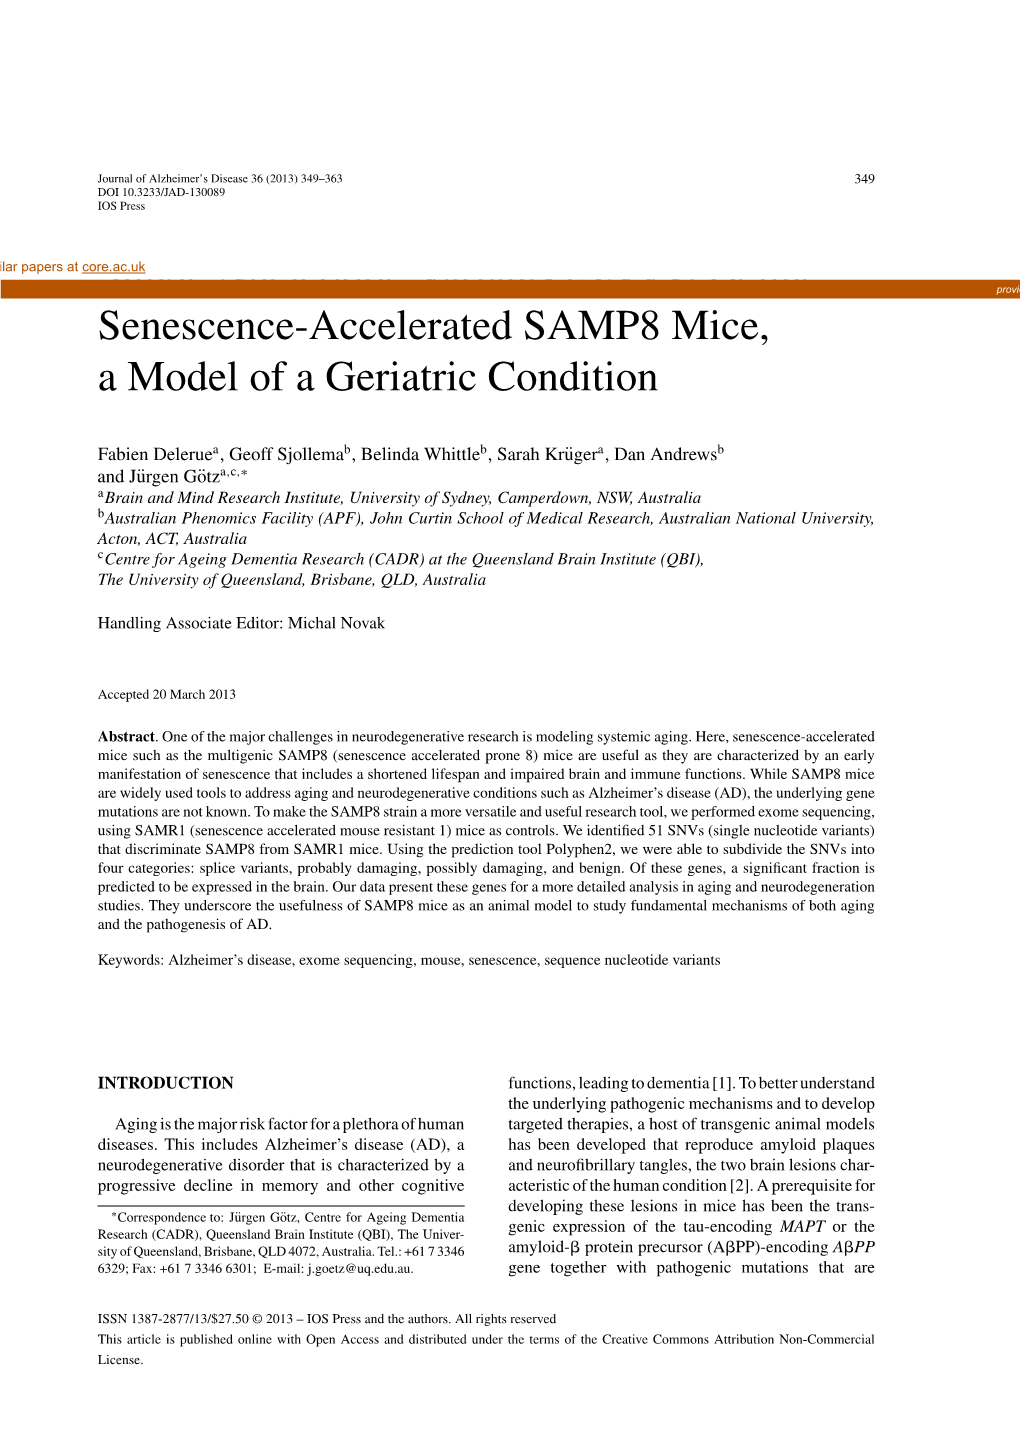 Single Nucleotide Variants (Snvs) Define Senescence-Accelerated SAMP8 Mice, a Model of a Geriatric Condition